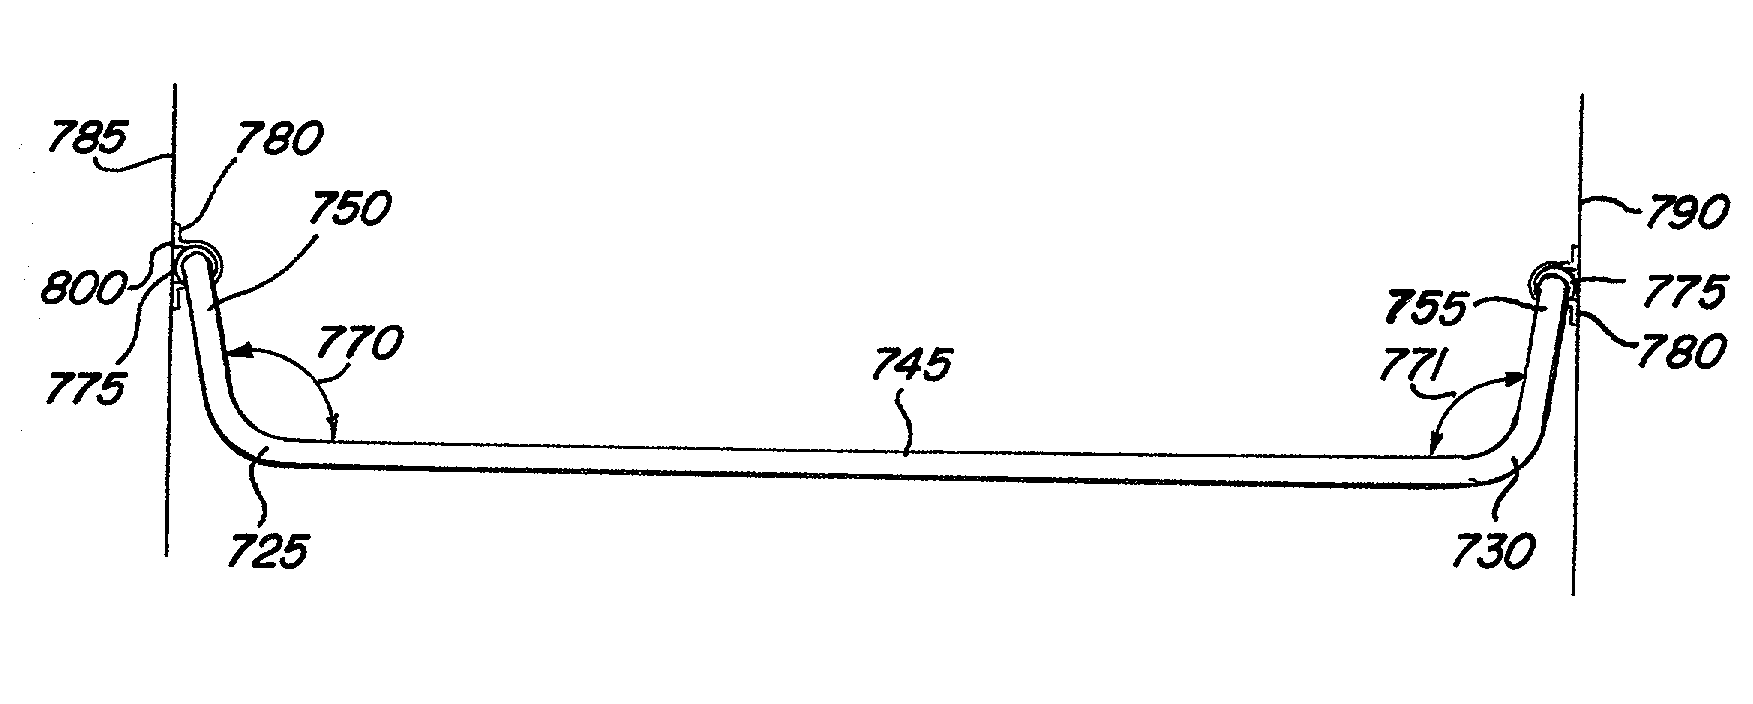 Apparatus and method for preventing water from escaping a shower area